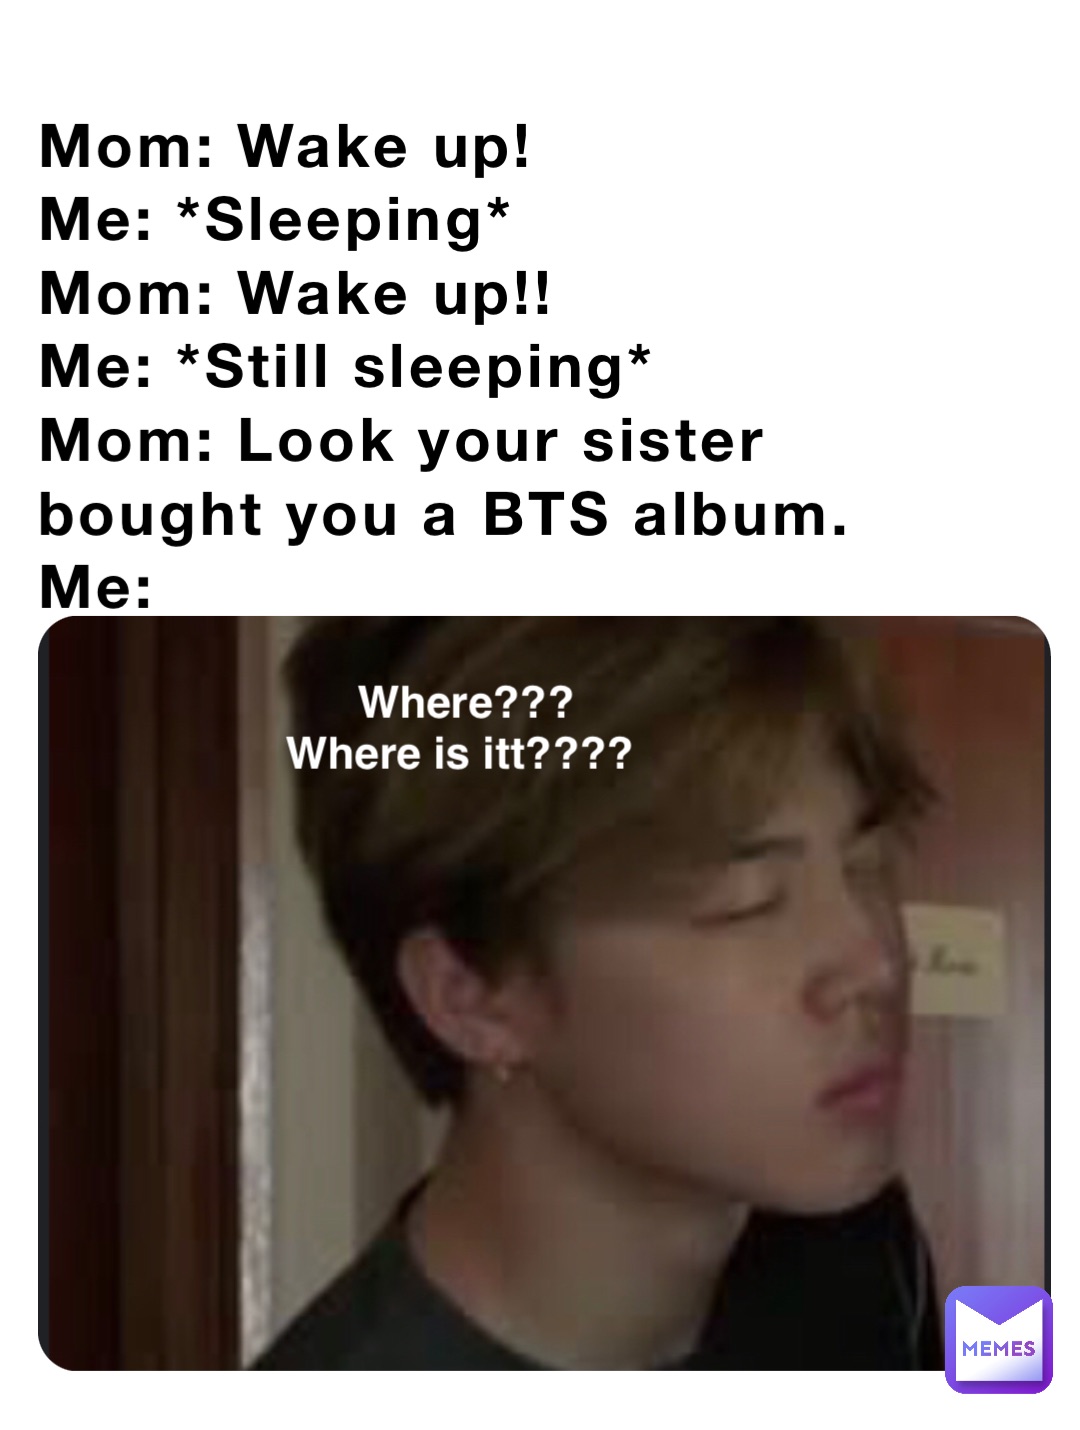 Mom: Wake up!
Me: *Sleeping*
Mom: Wake up!!
Me: *Still sleeping*
Mom: Look your sister bought you a BTS album.
Me: Where??? 
Where is itt????